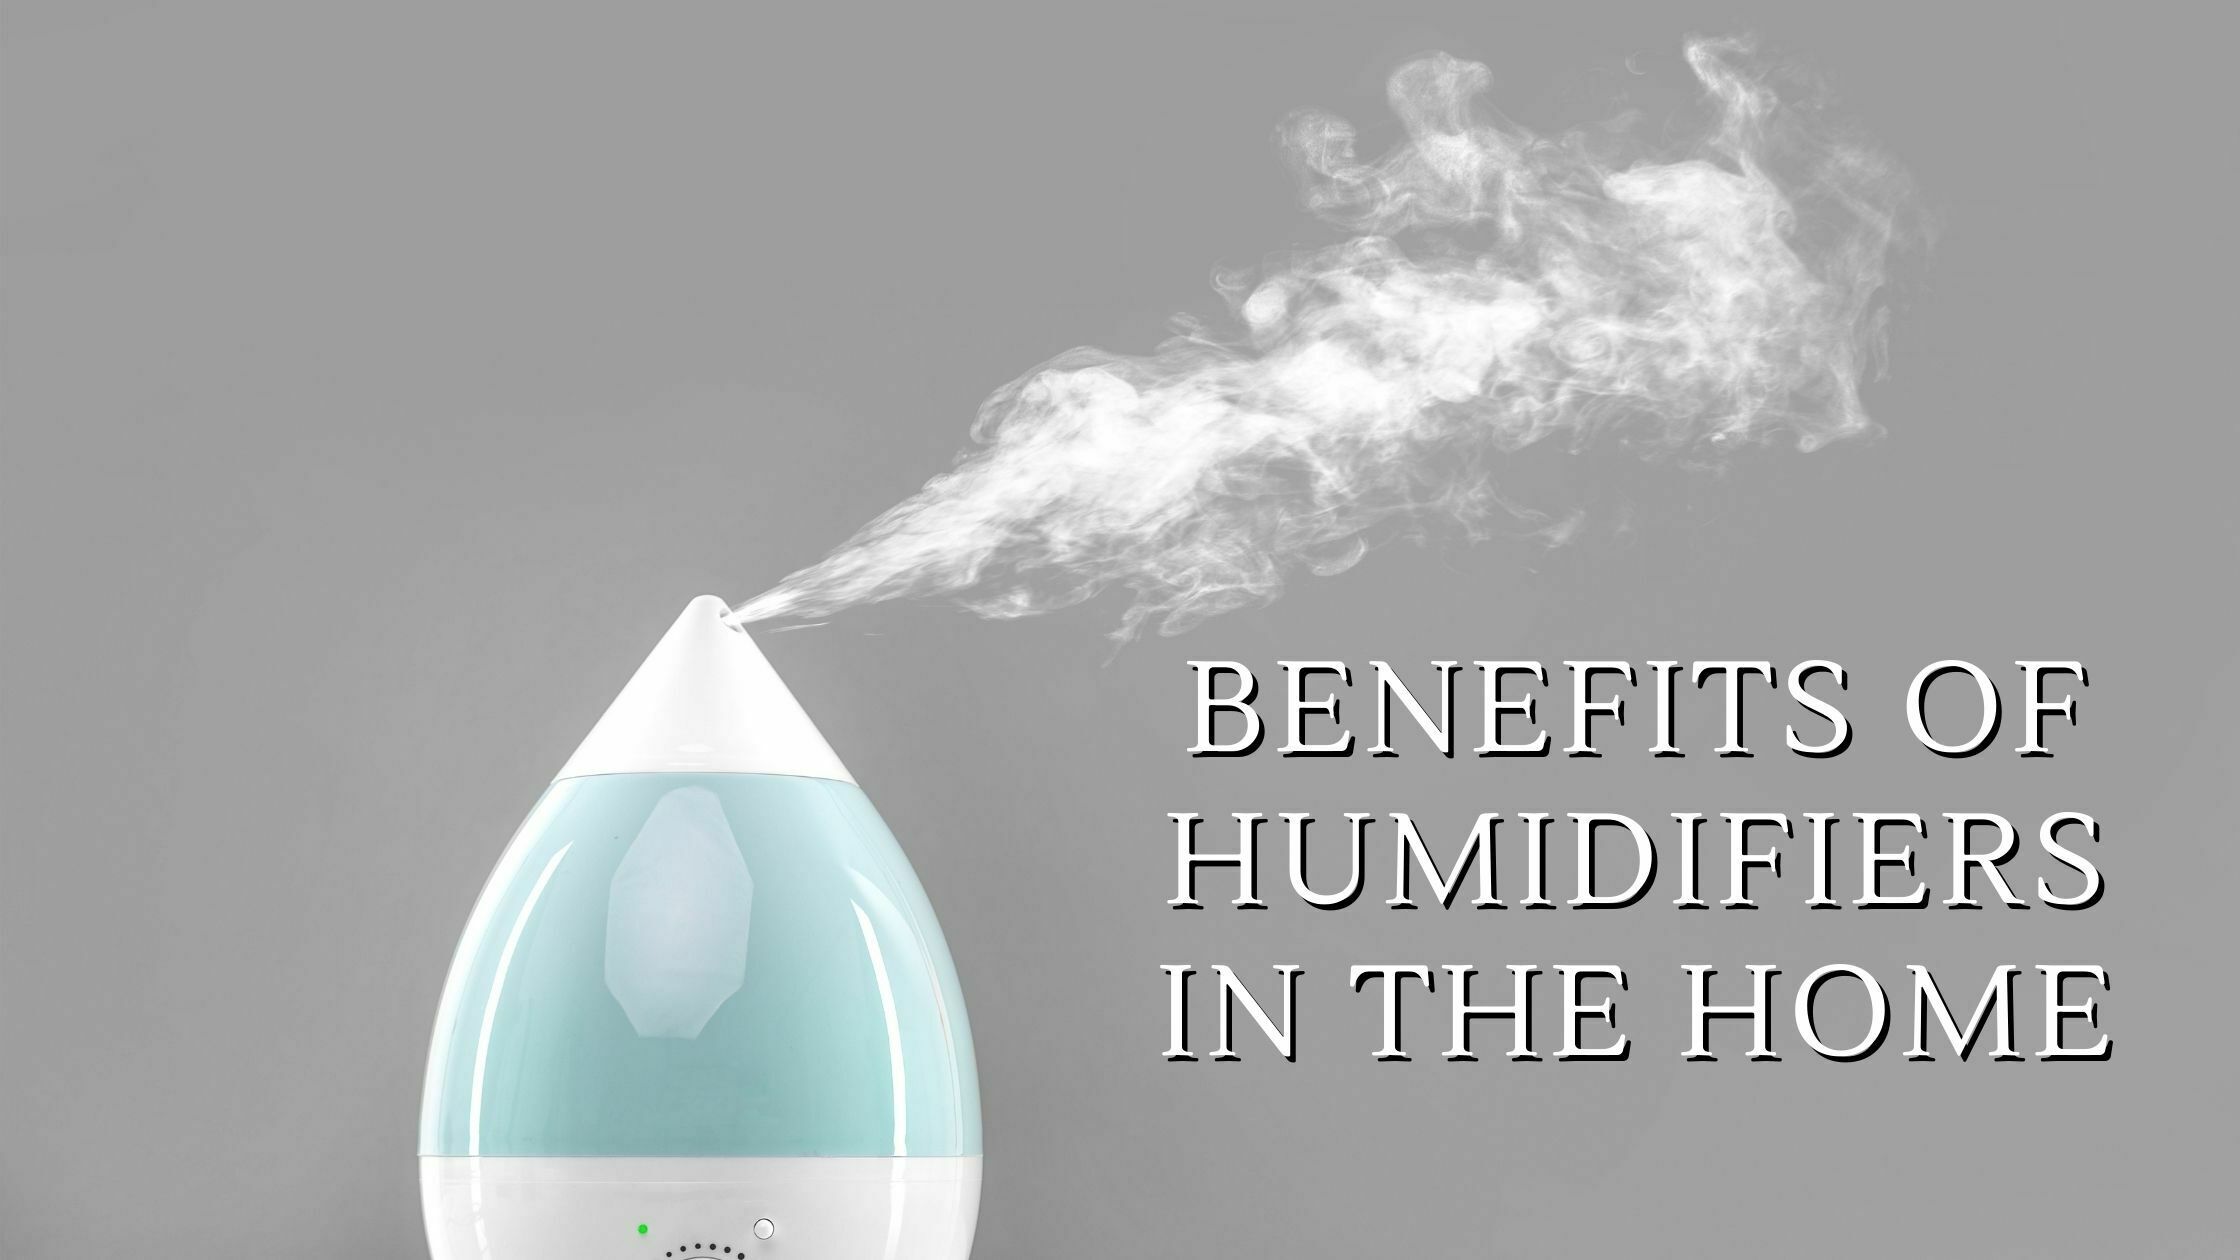 Benefits of Humidifiers in the Home